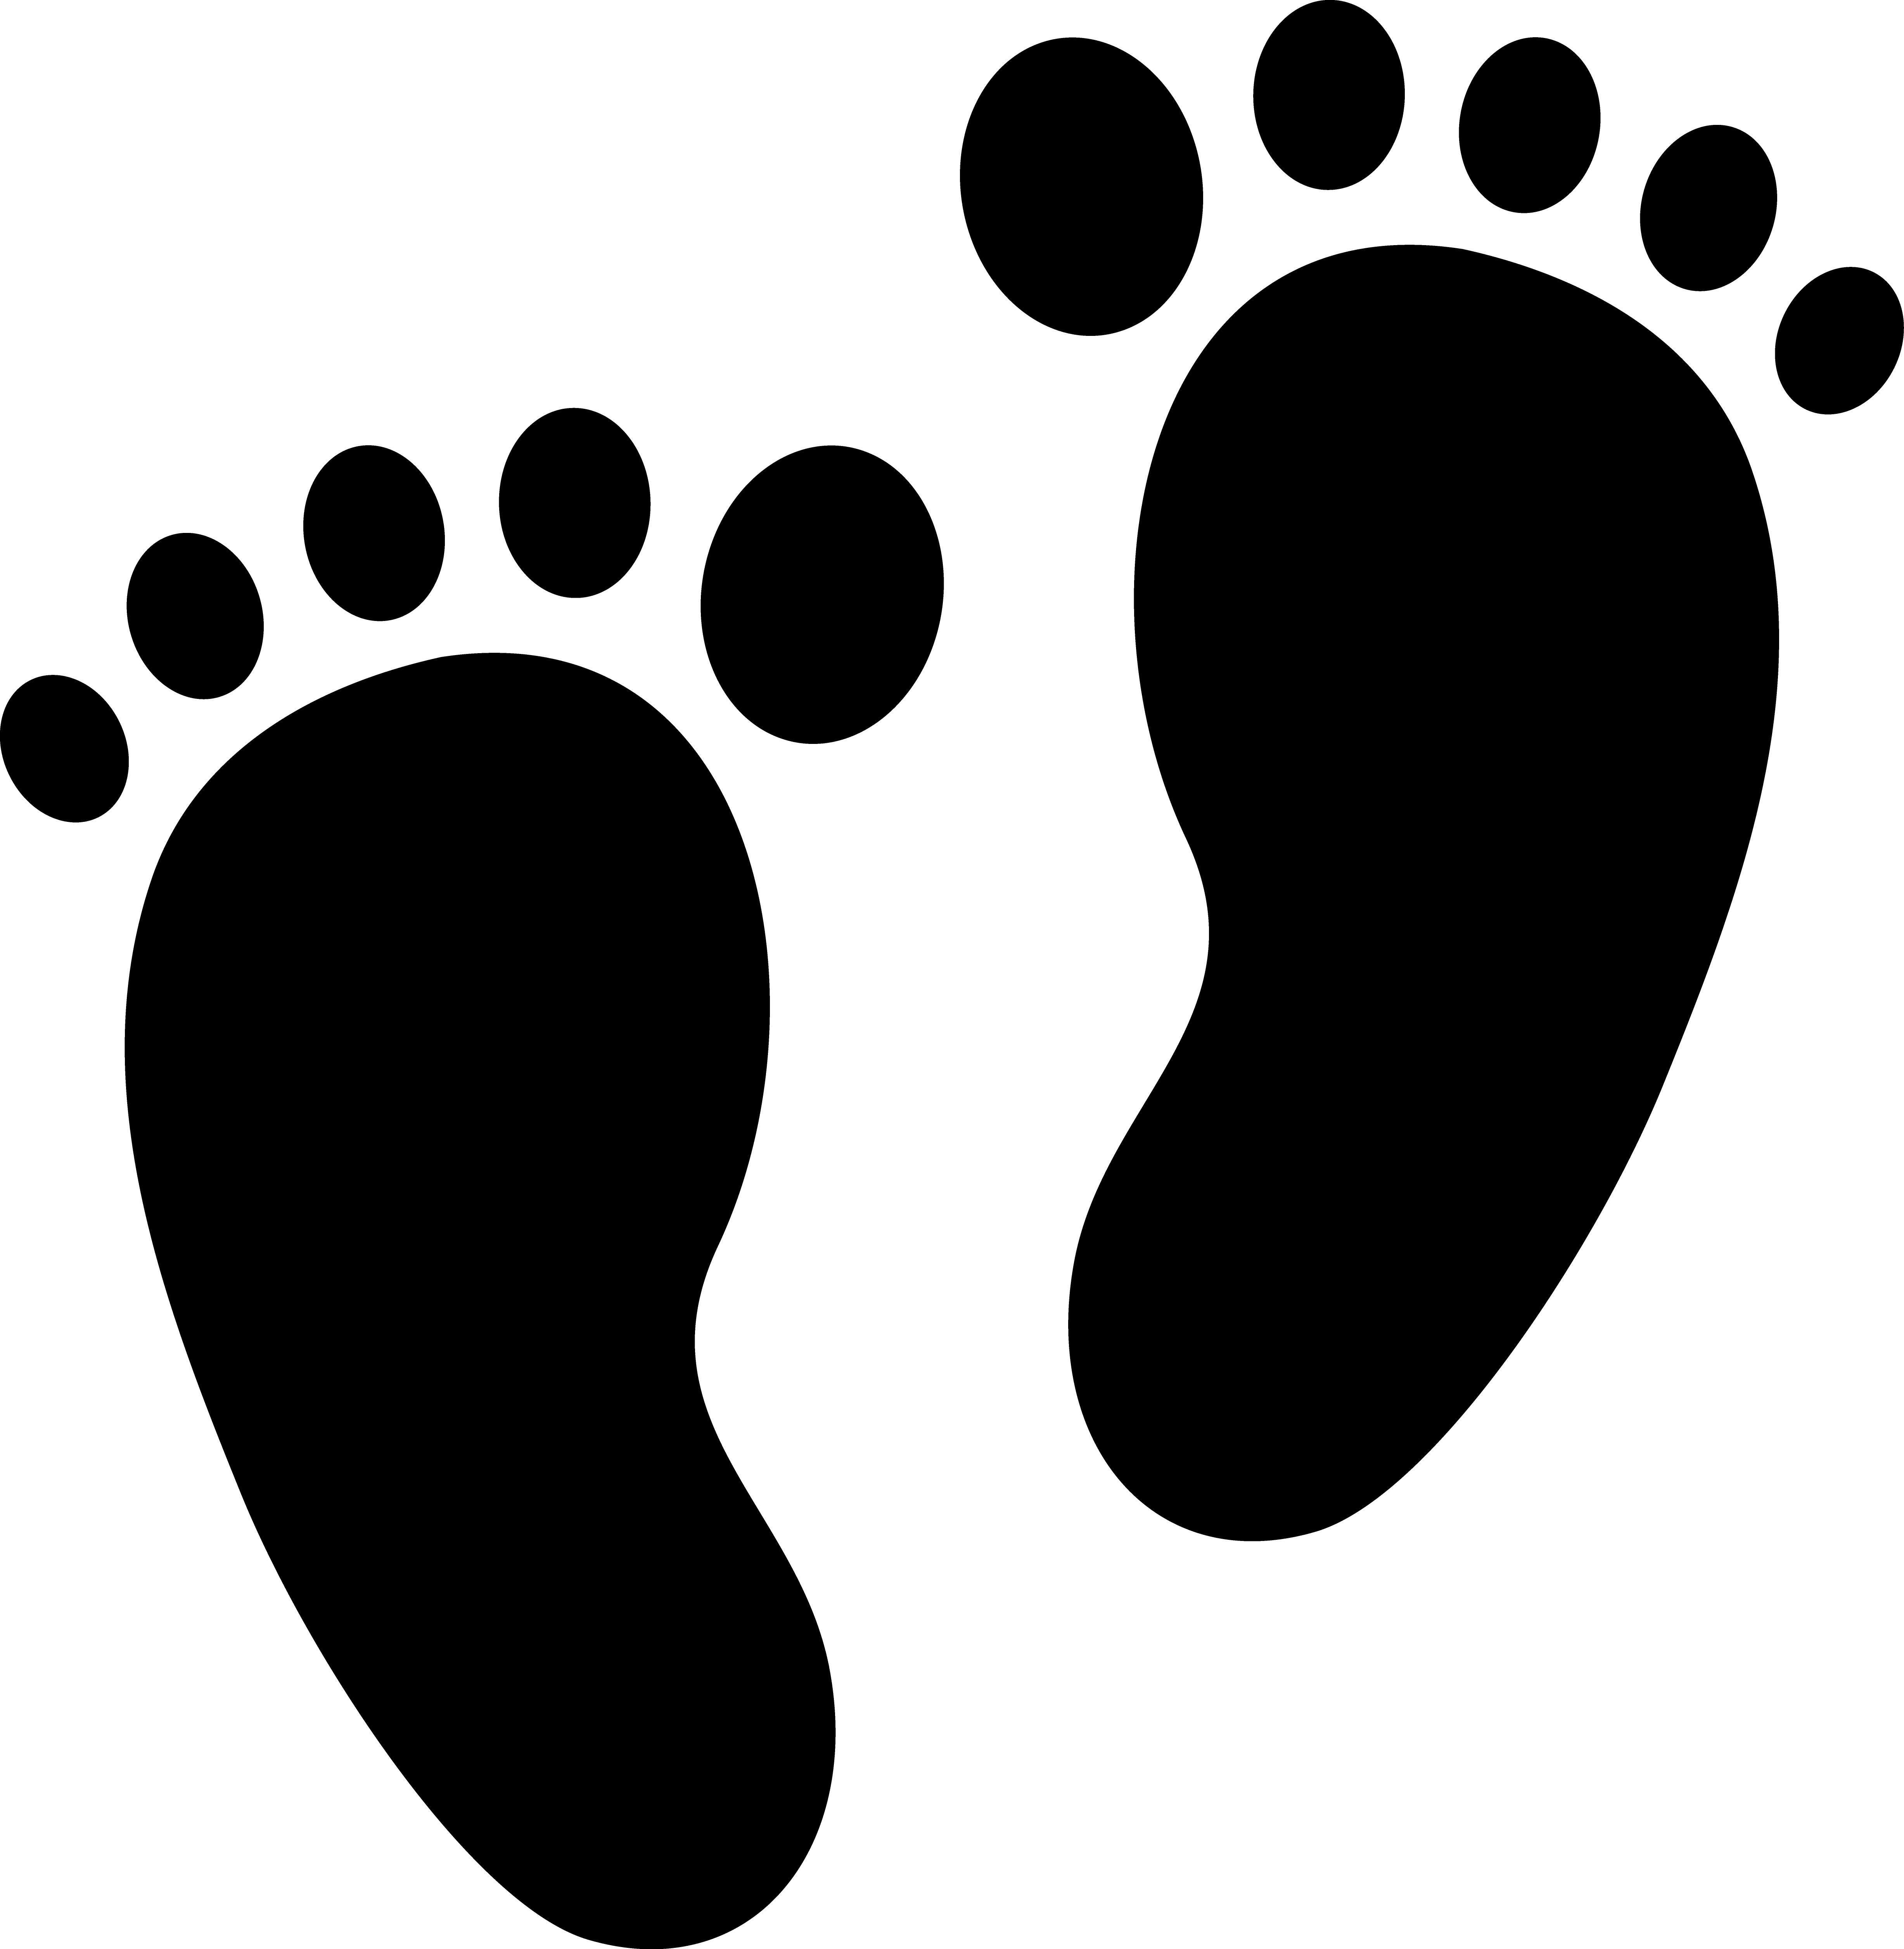 Download Free Baby Feet Silhouette At Getdrawings Free Download SVG DXF Cut File